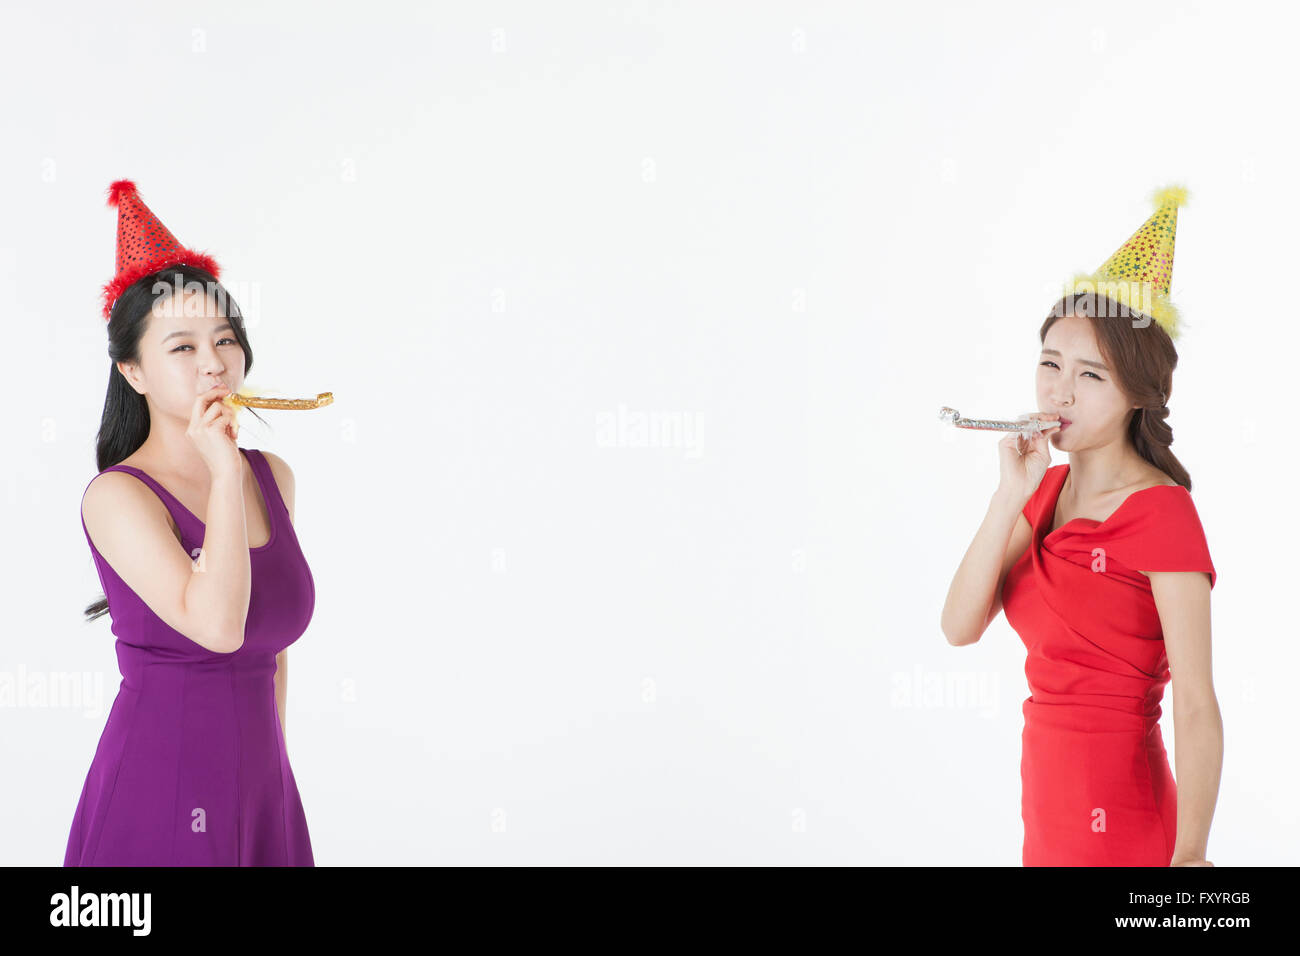 Side view portrait of smiling women blowing party horns Banque D'Images